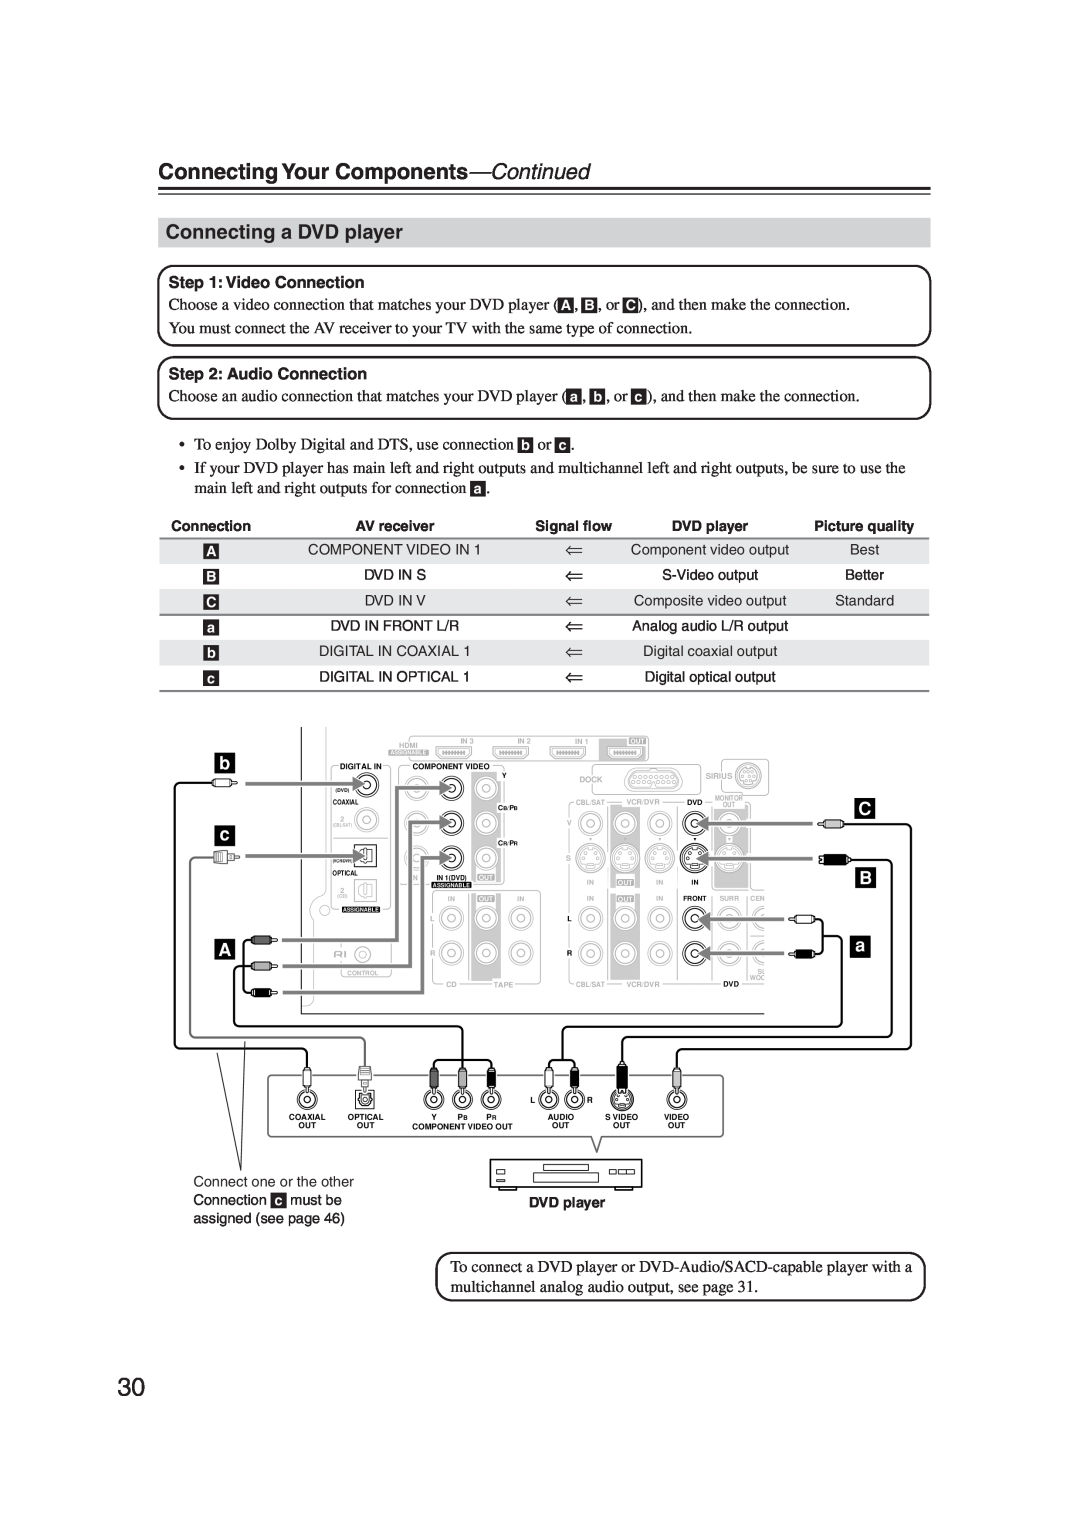 Onkyo S5100 instruction manual Connecting a DVD player, Connecting Your Components—Continued 